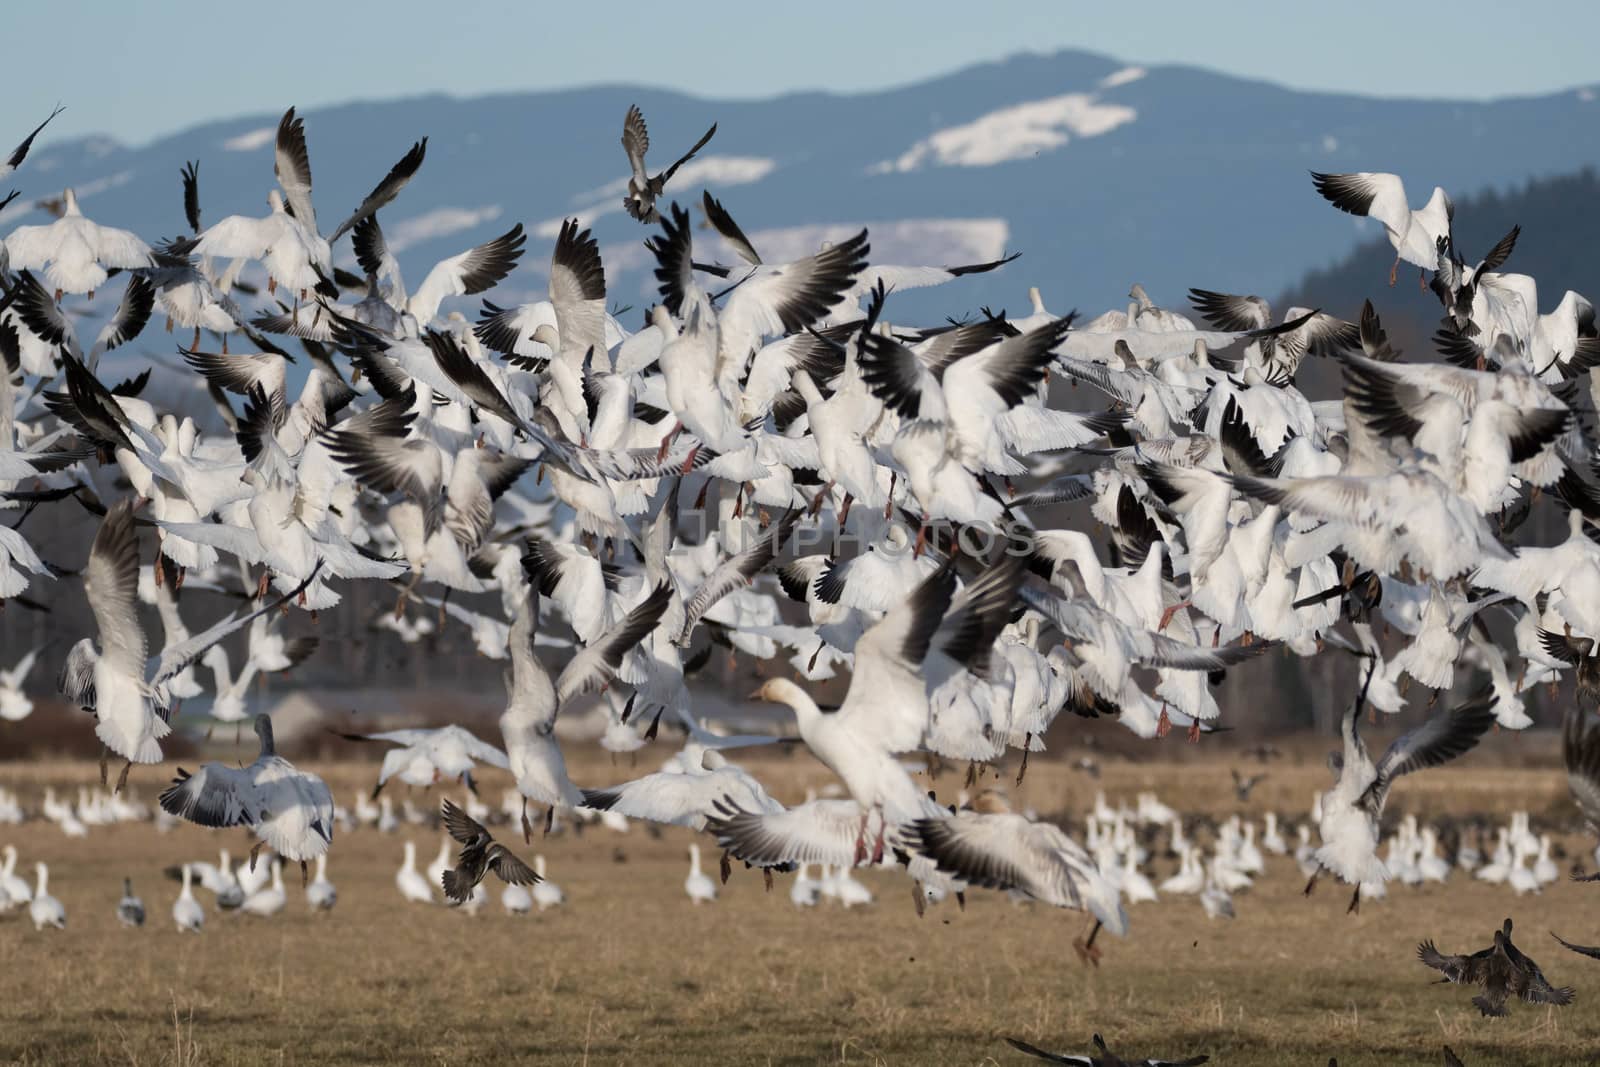 Snow Geese flying over Skagit Valley, WA